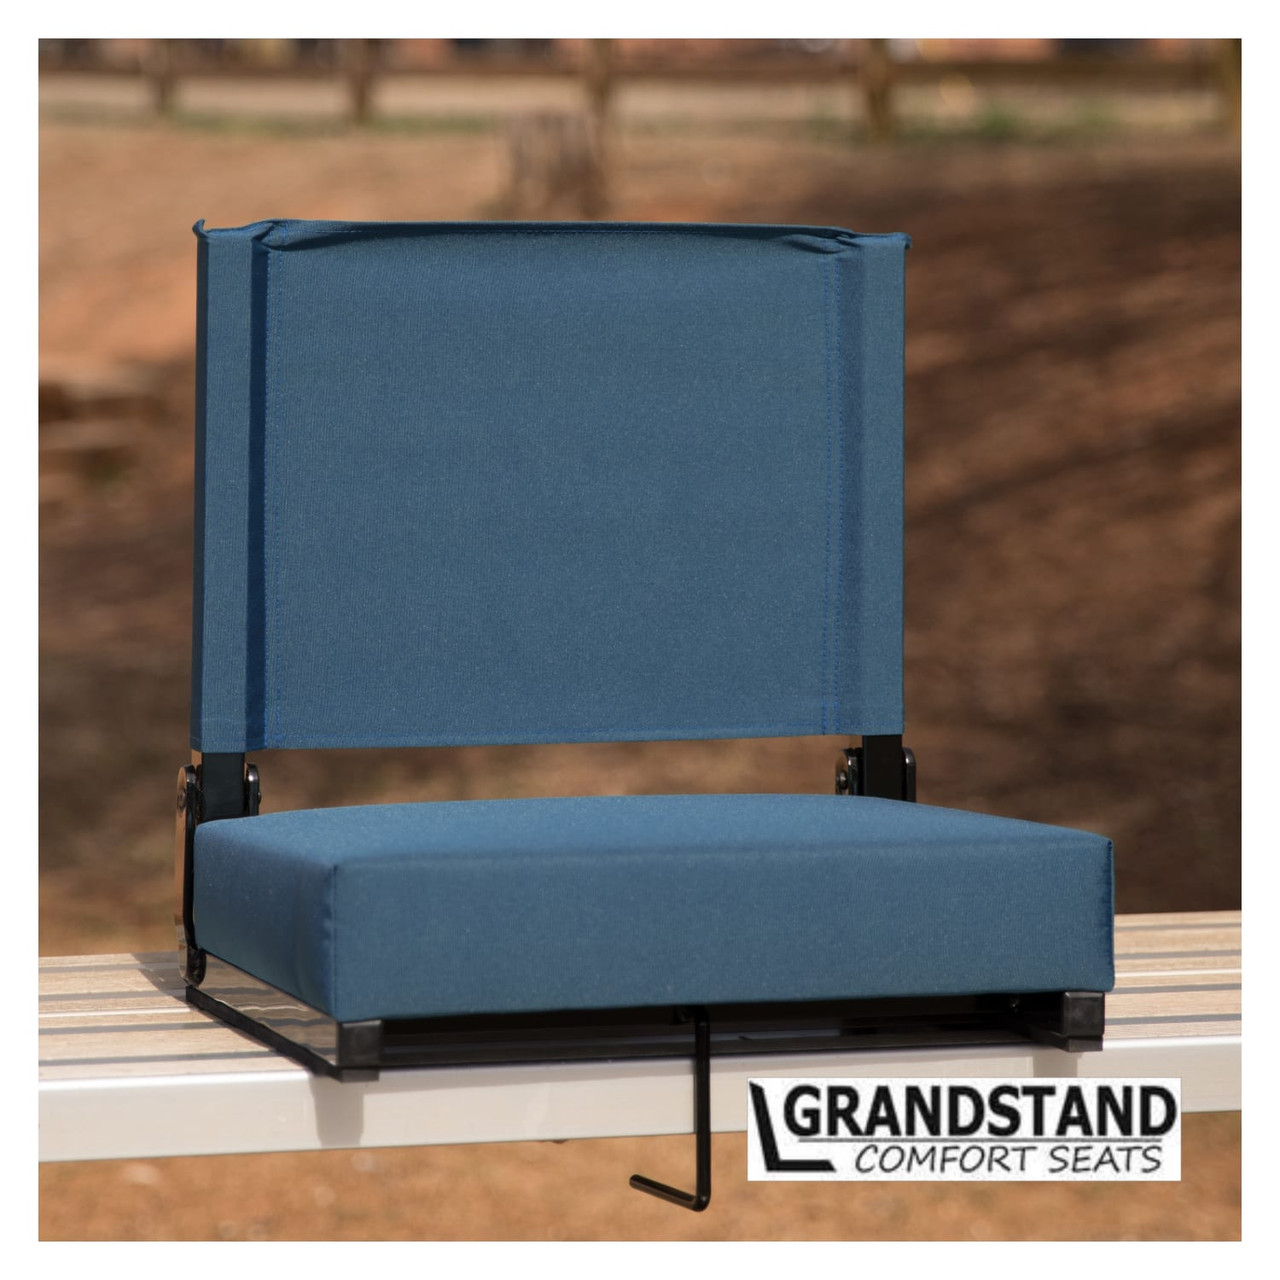 Set of 2 Grandstand Comfort Seats by Flash - 500 lb. Rated Lightweight Stadium Chair with Handle & Ultra-Padded Seat, Teal